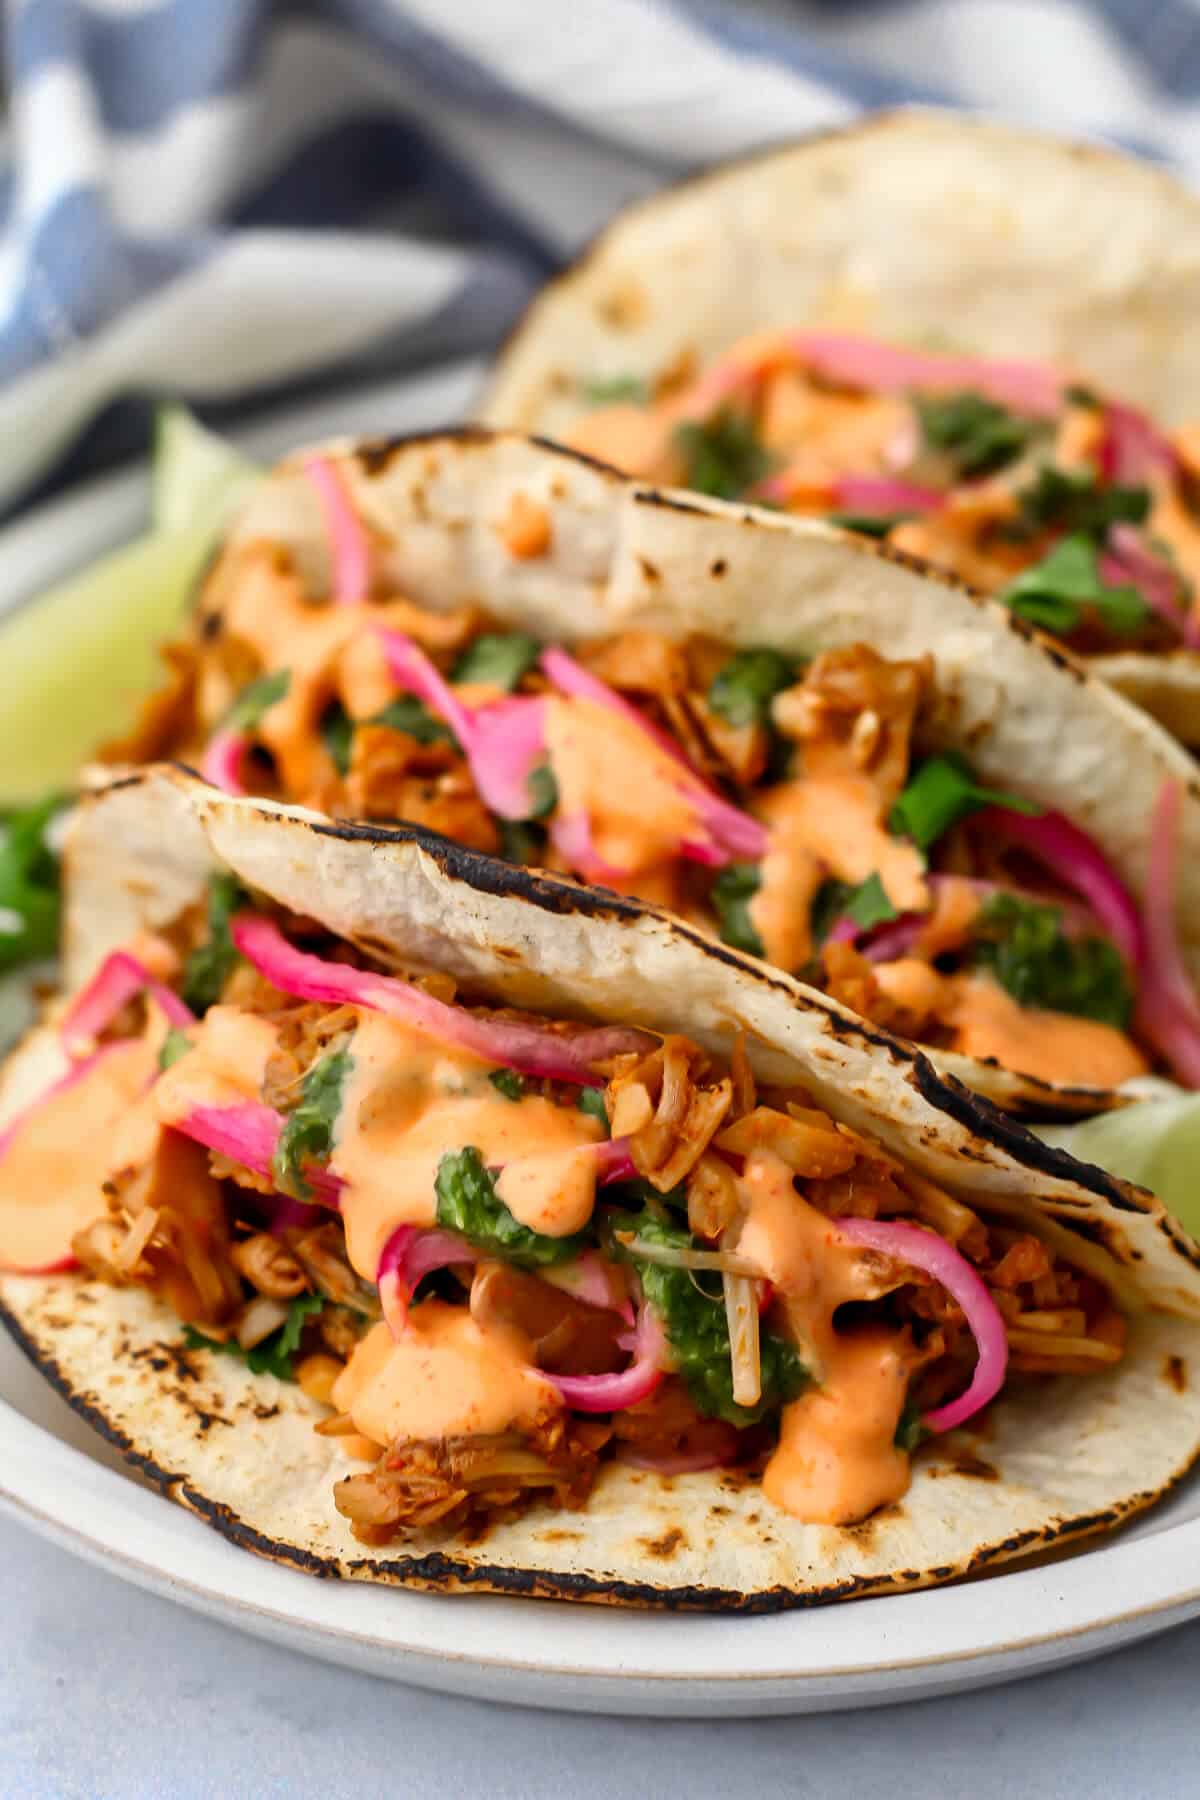 Jackfruit tacos with pickled onions and vegan sriracha mayo drizzled on top.